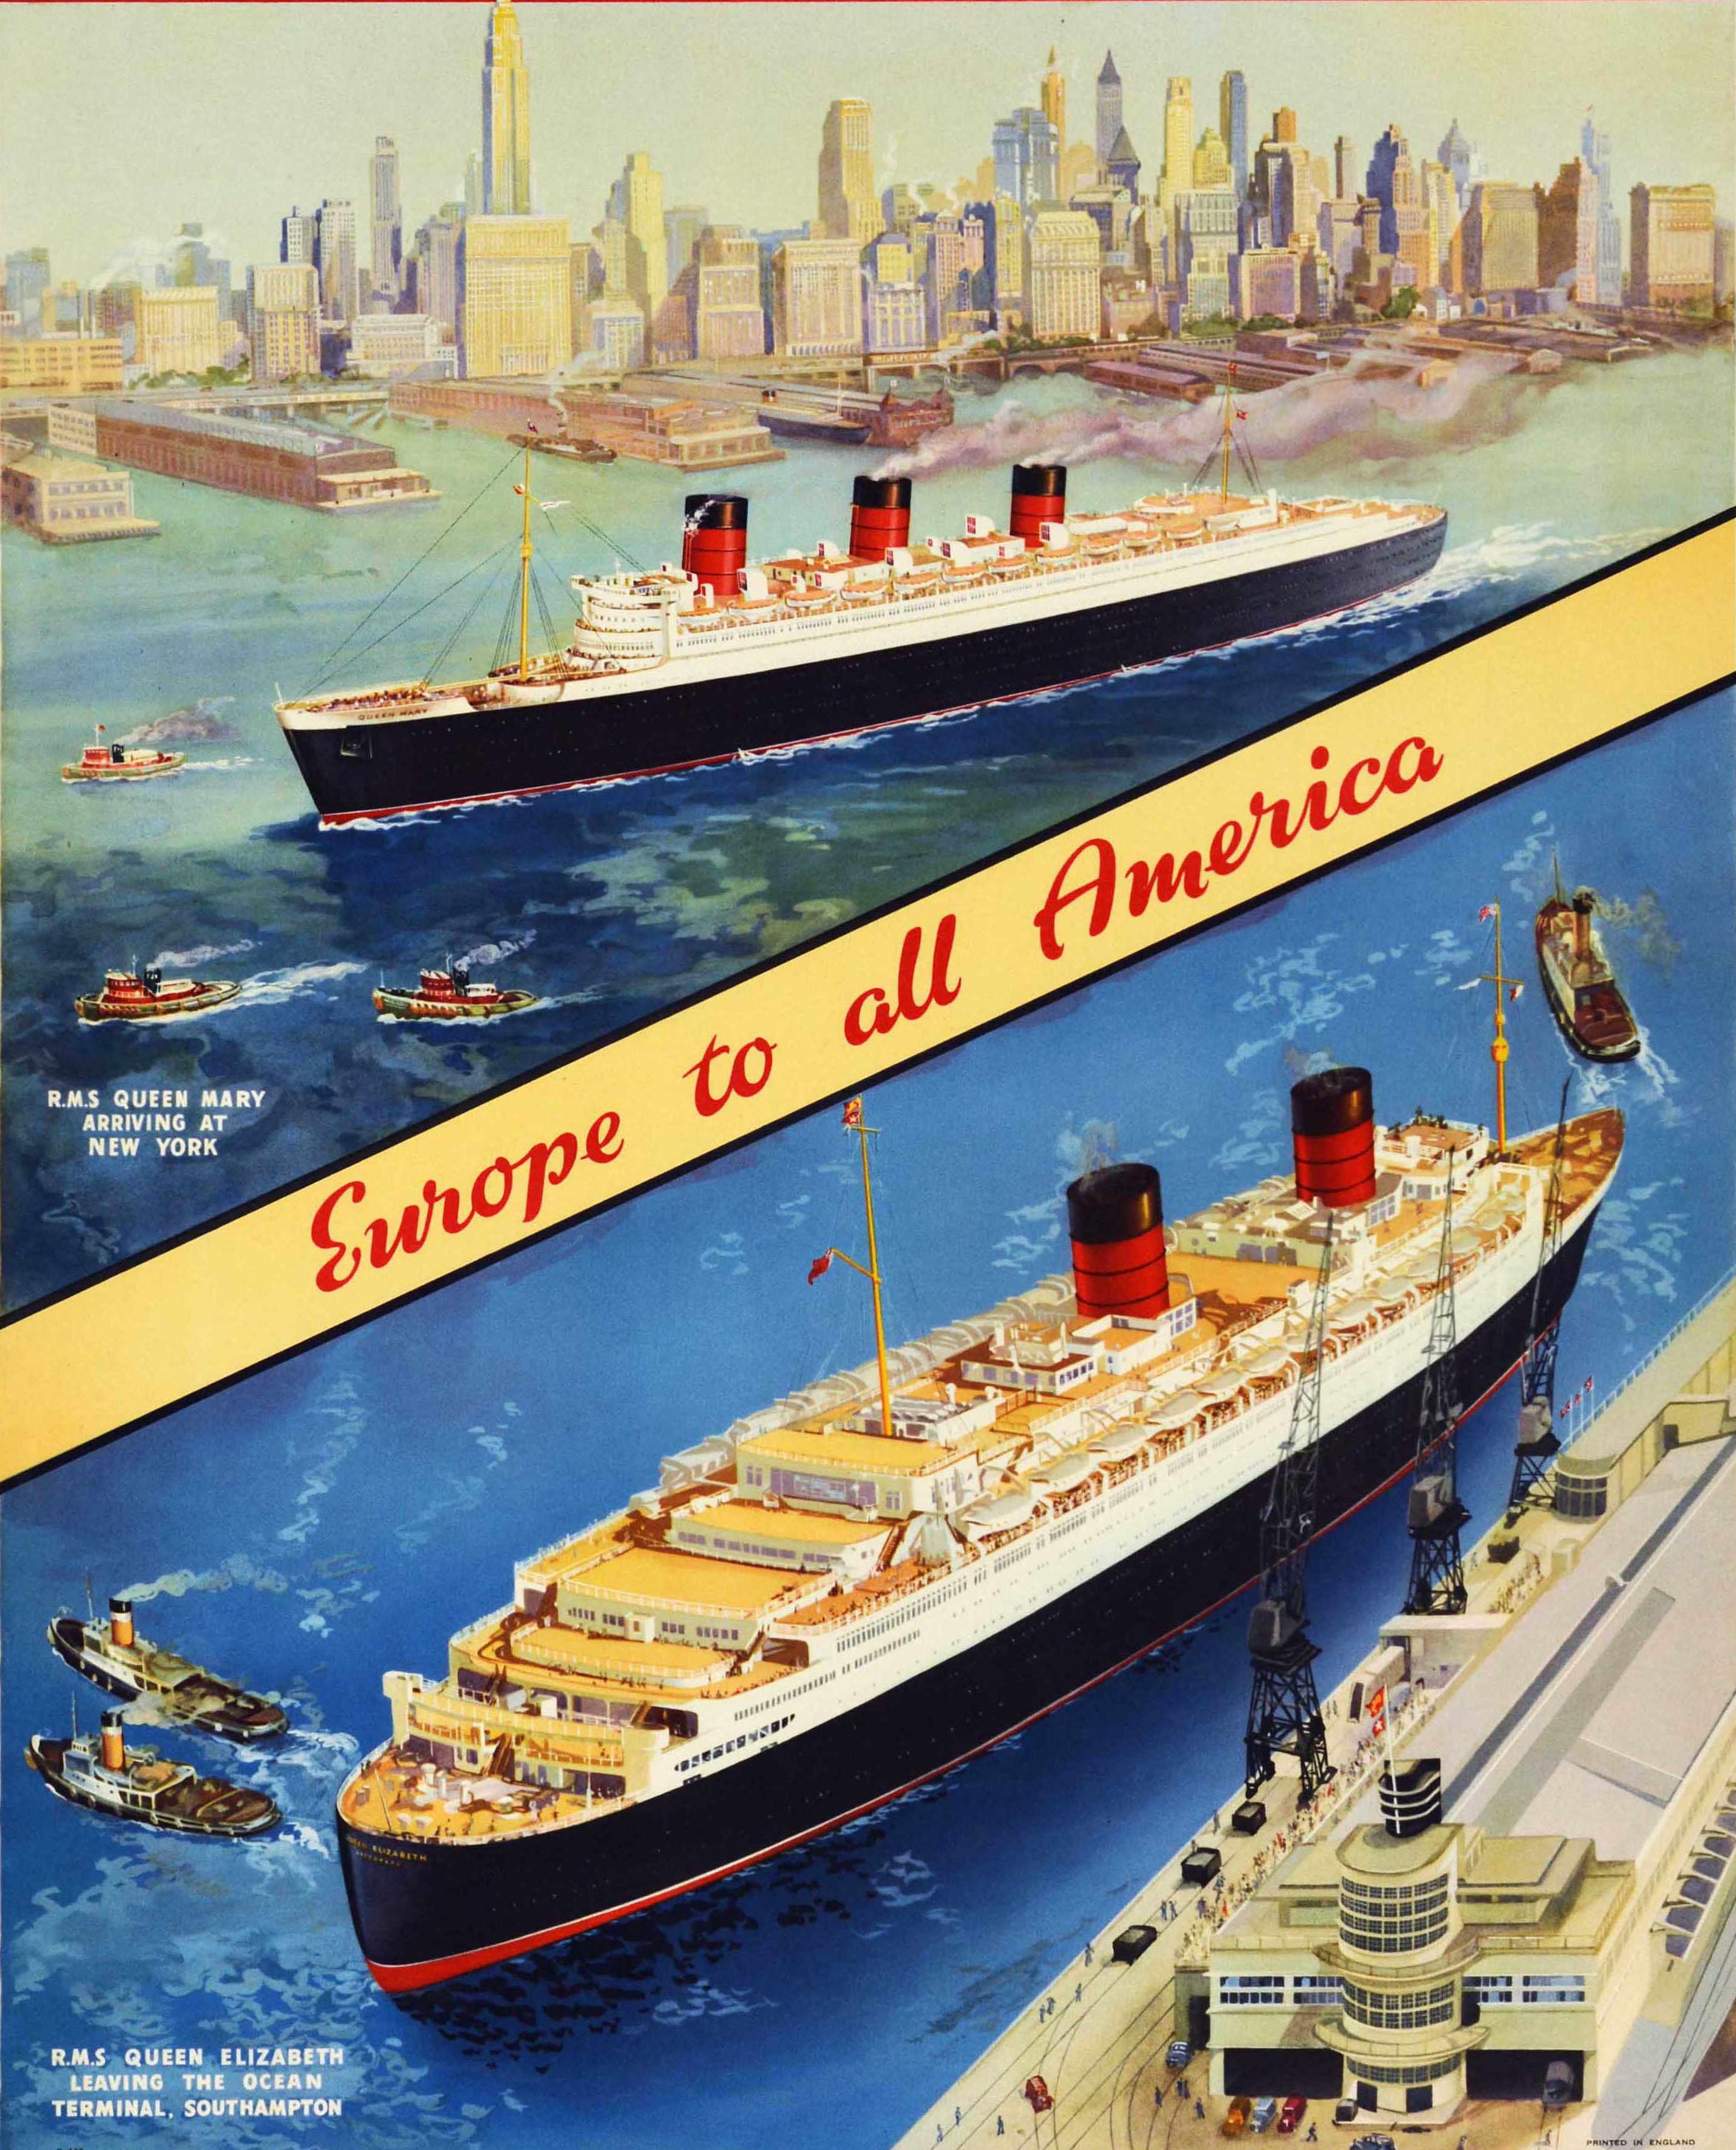 Original vintage Cunard travel advertising poster - Europe to all America Fastest ocean service in the world. Stunning design promoting cruise ship sailings featuring two colourful illustrations of the transatlantic ocean liners RMS Queen Mary